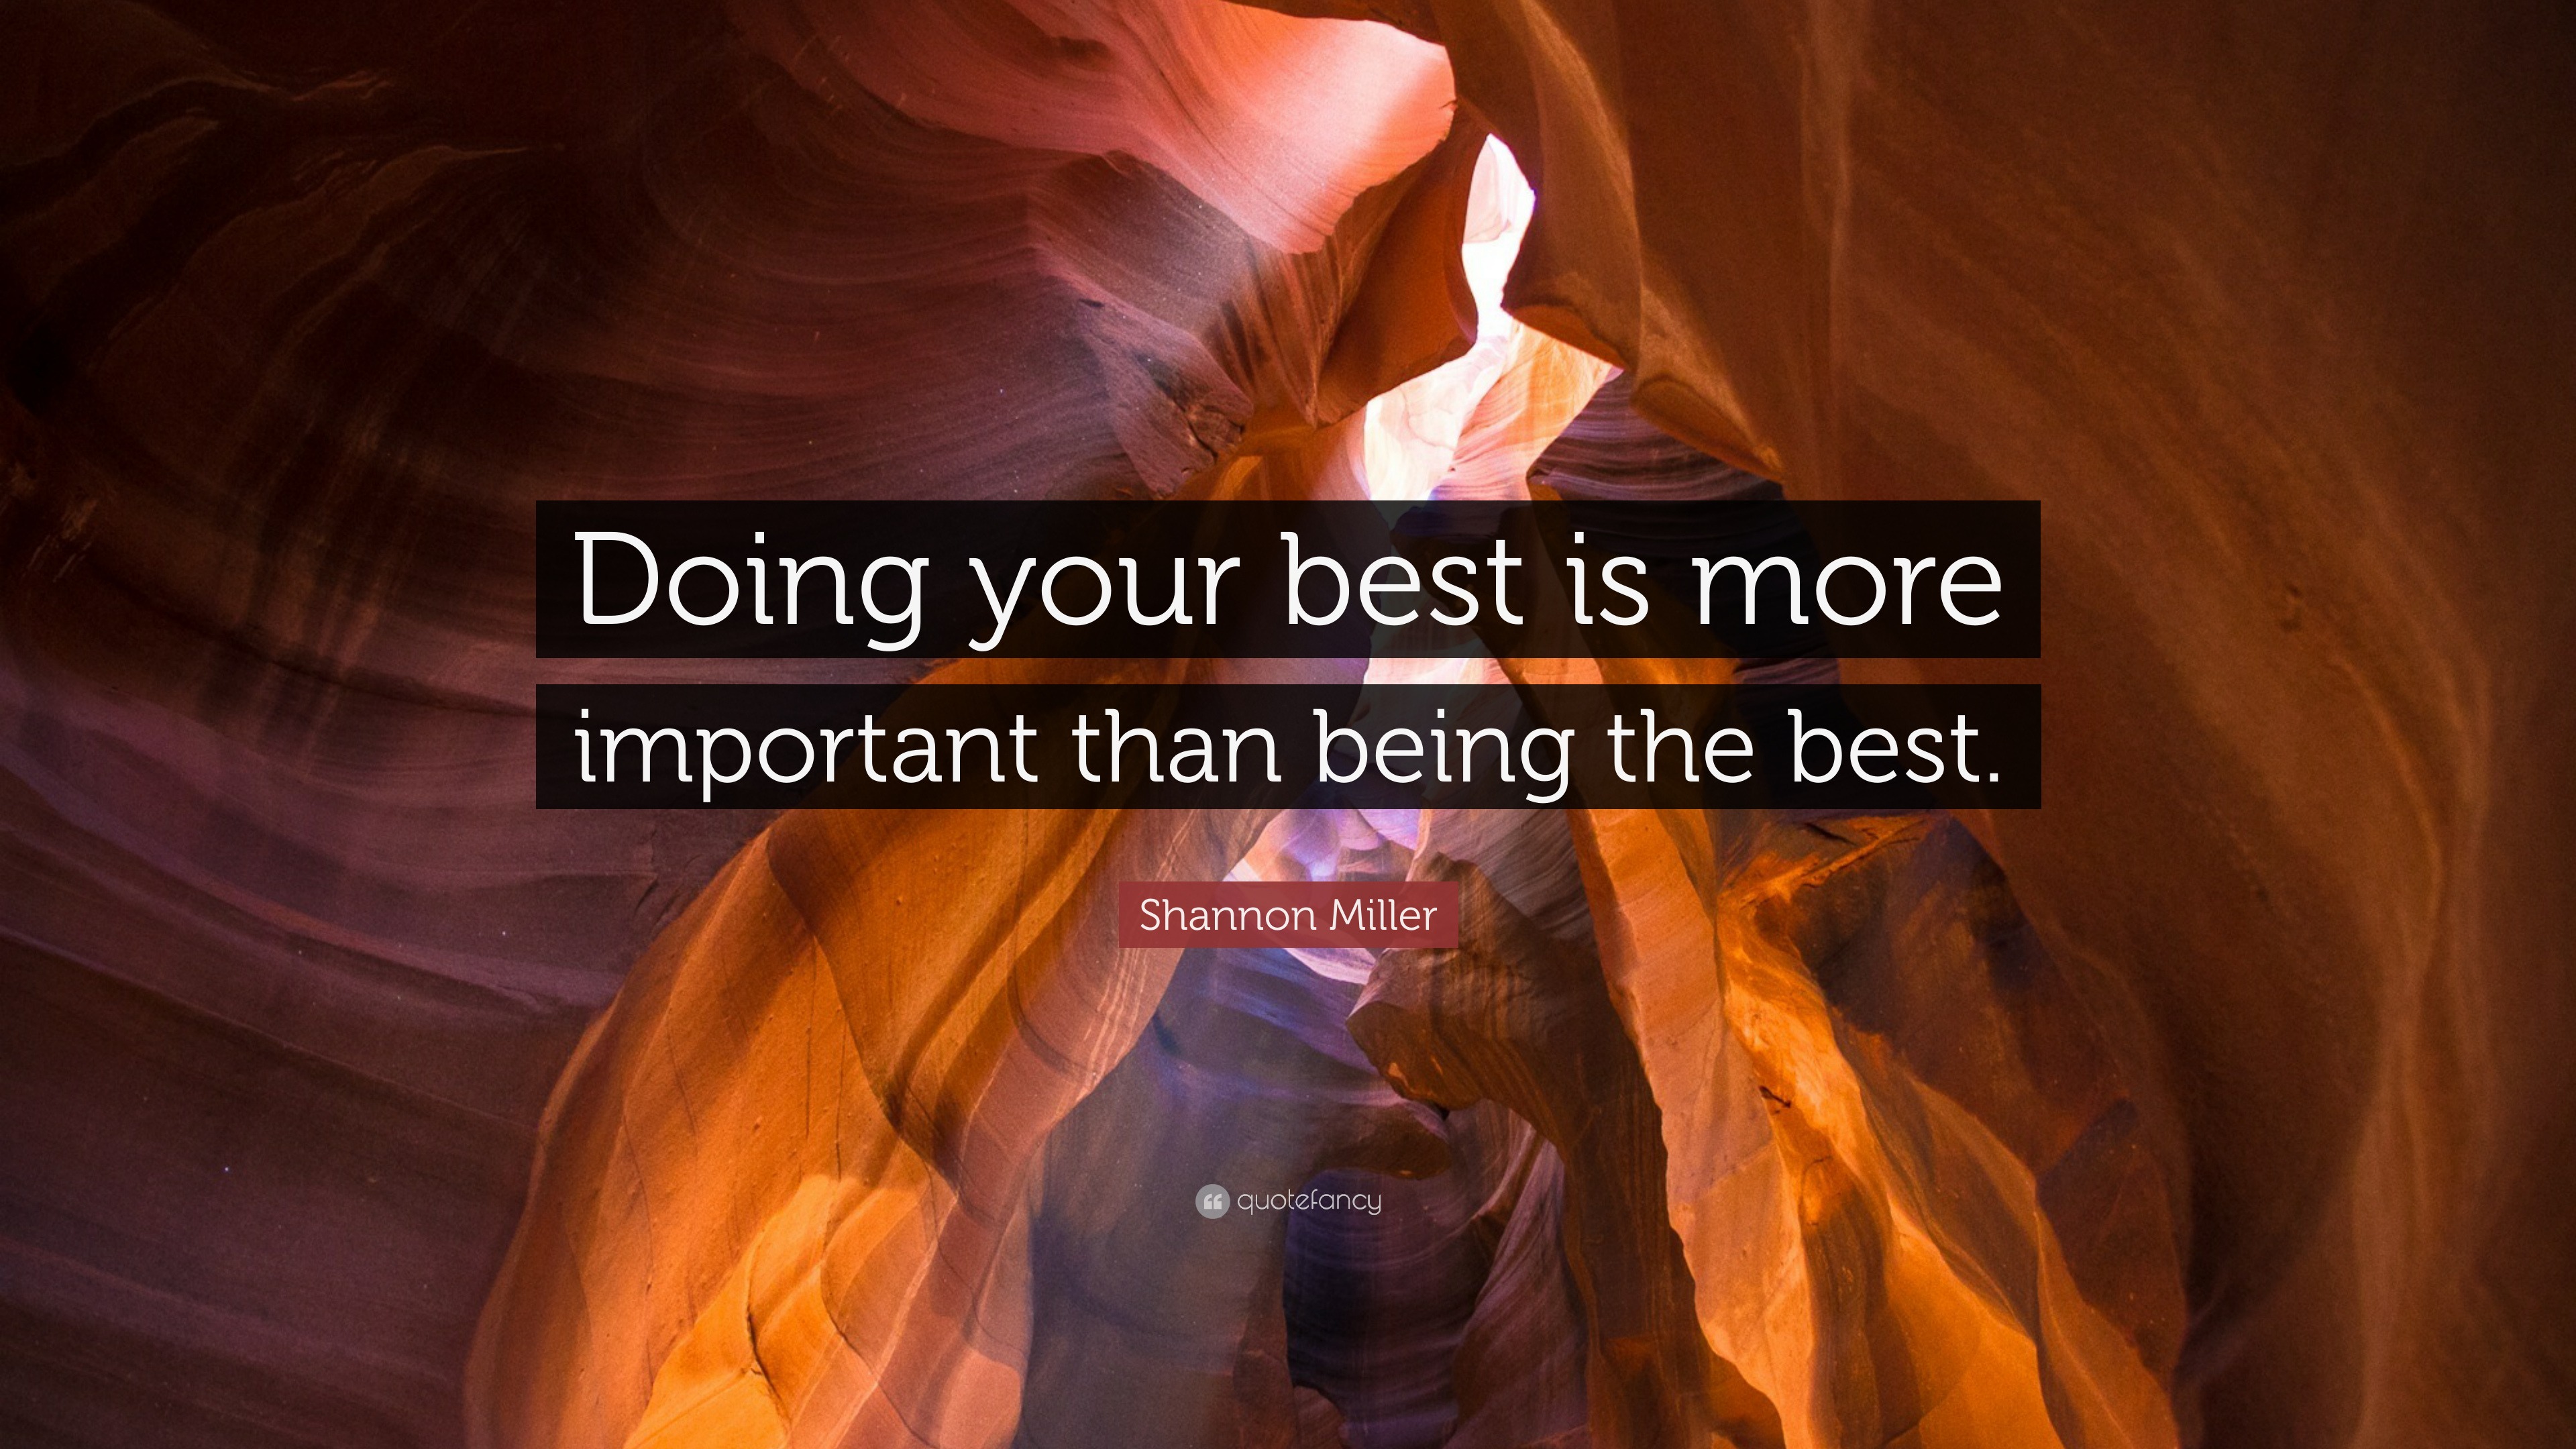 Shannon Miller Quote: “Doing your best is more important than being the